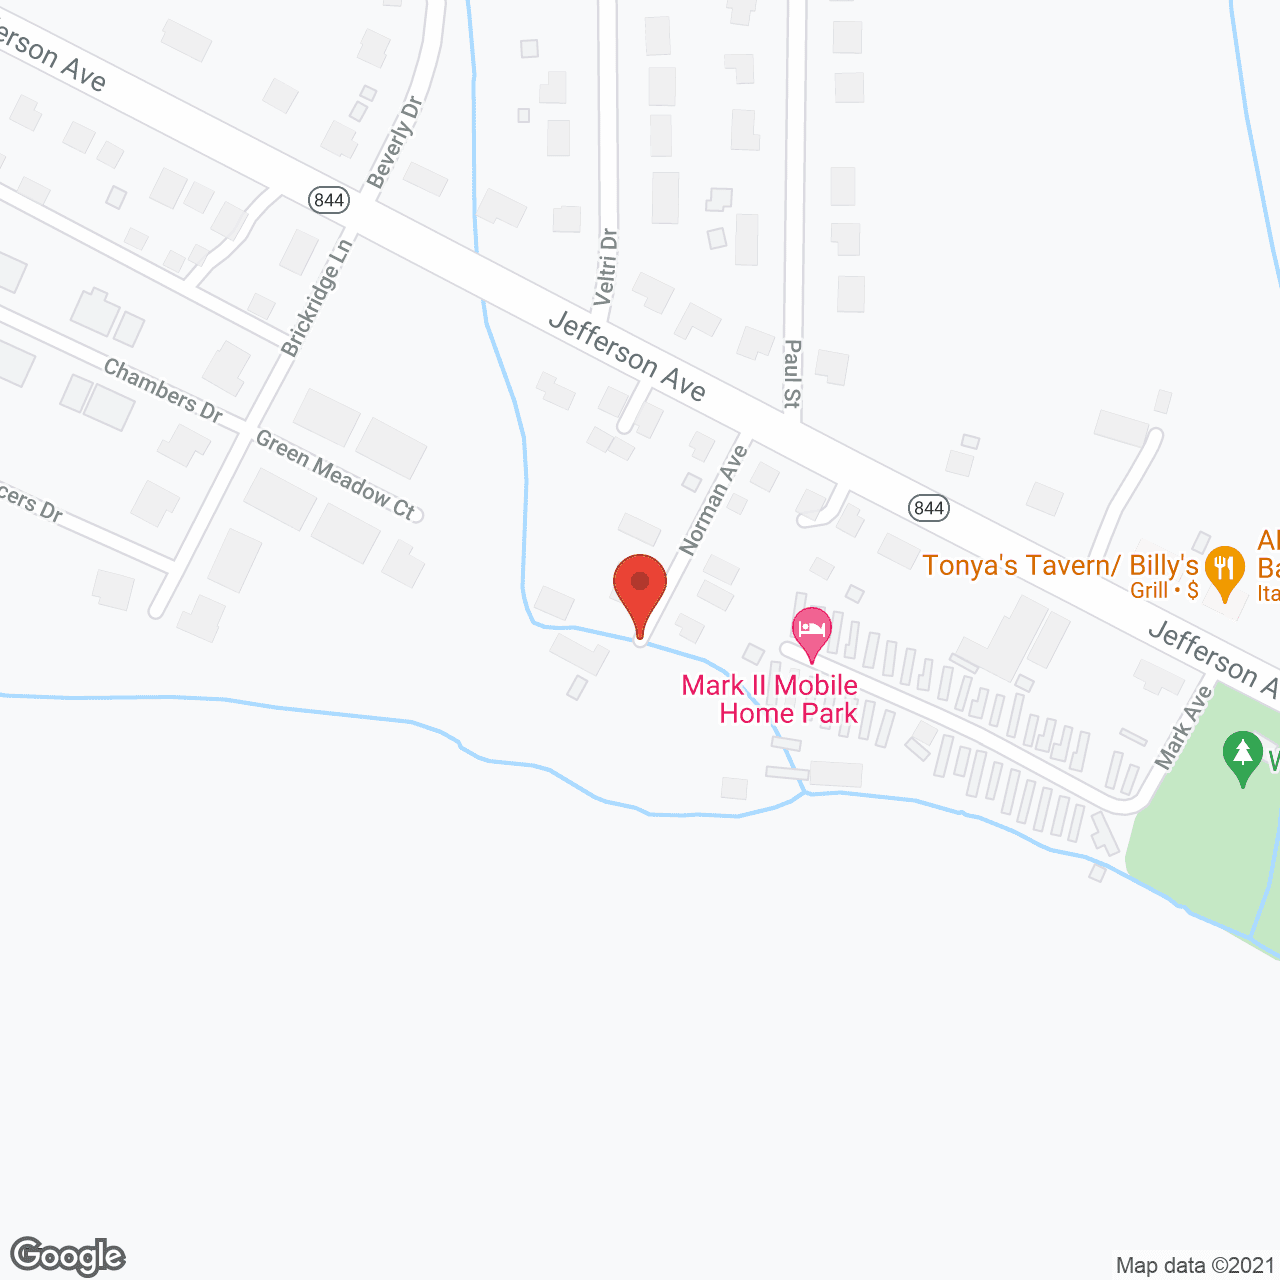 Day's Personal Care Home in google map